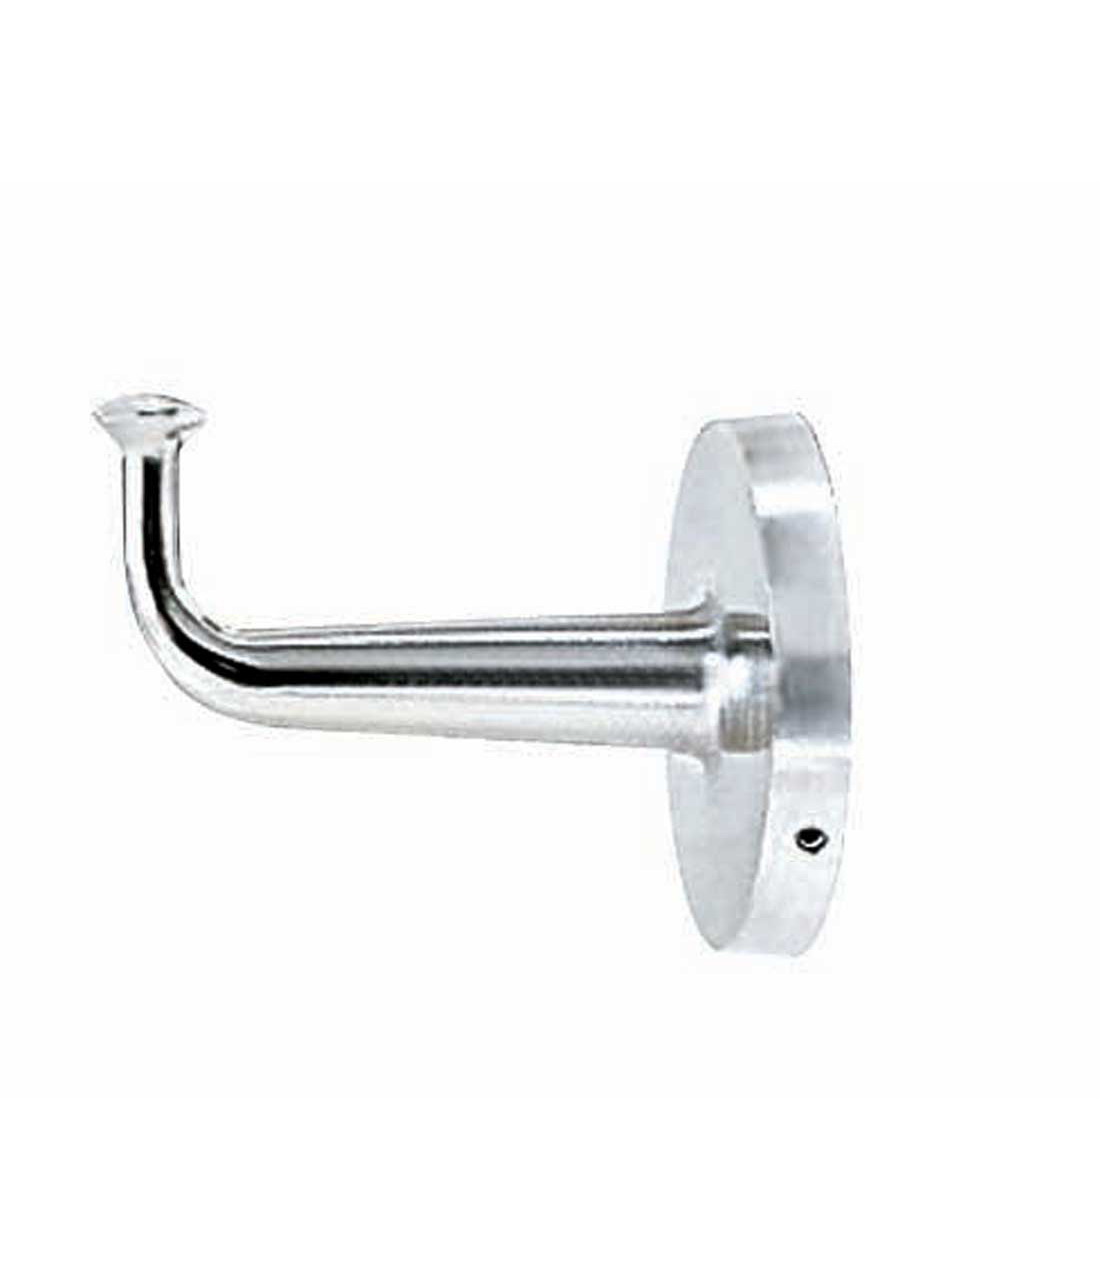 Heavy-Duty Clothes Hook with Concealed Mounting - (Model #: b-2116)-image